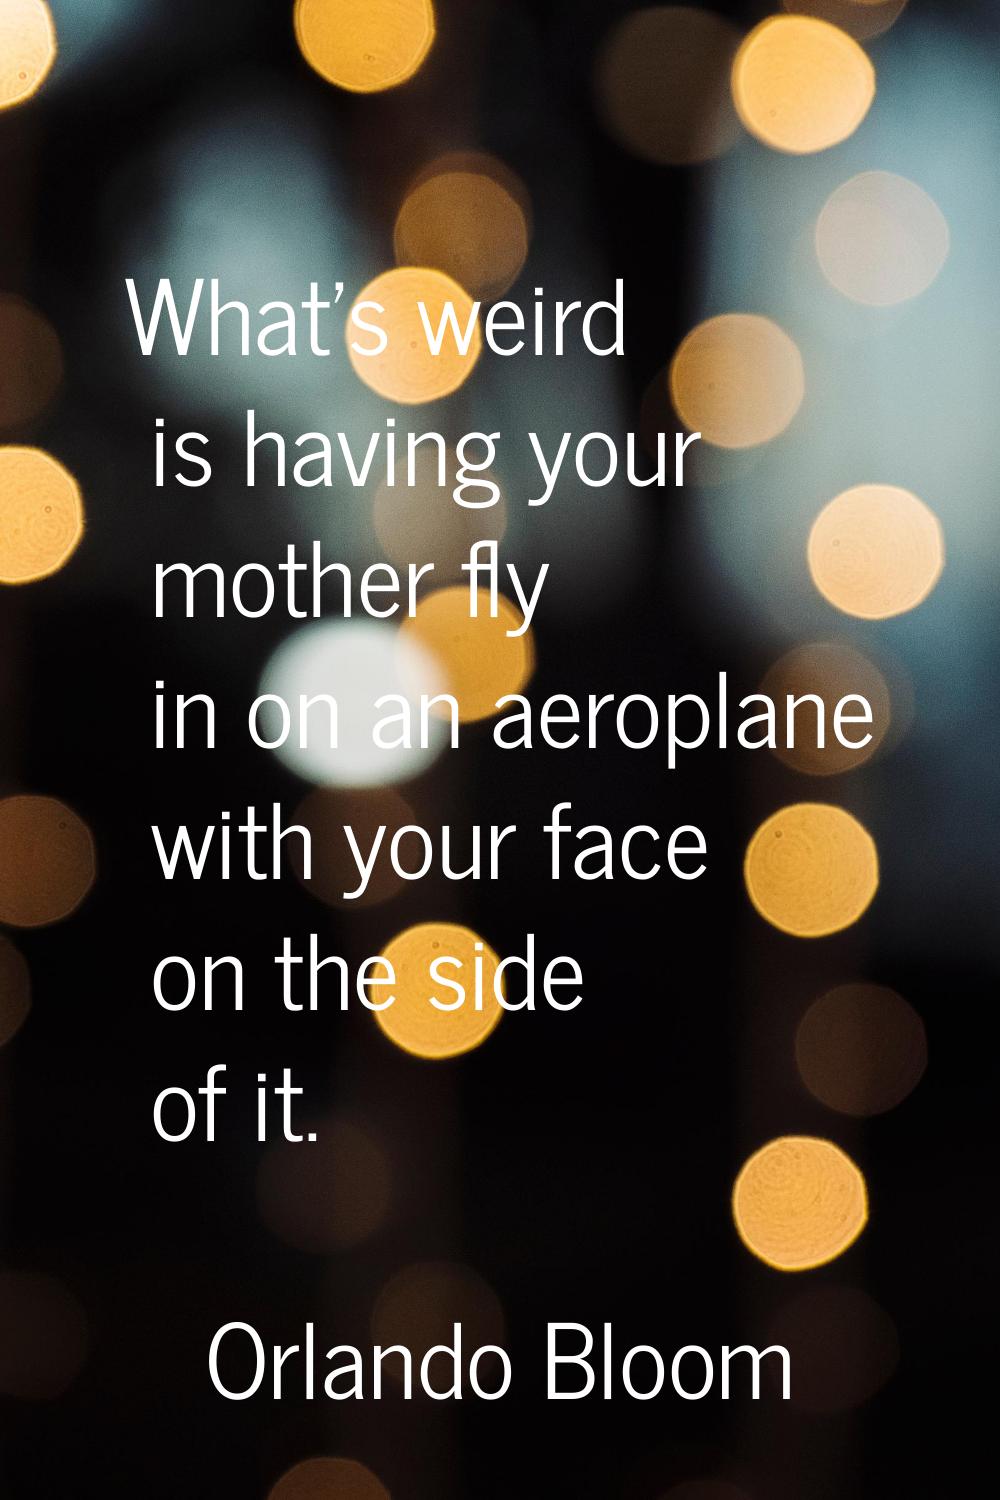 What's weird is having your mother fly in on an aeroplane with your face on the side of it.